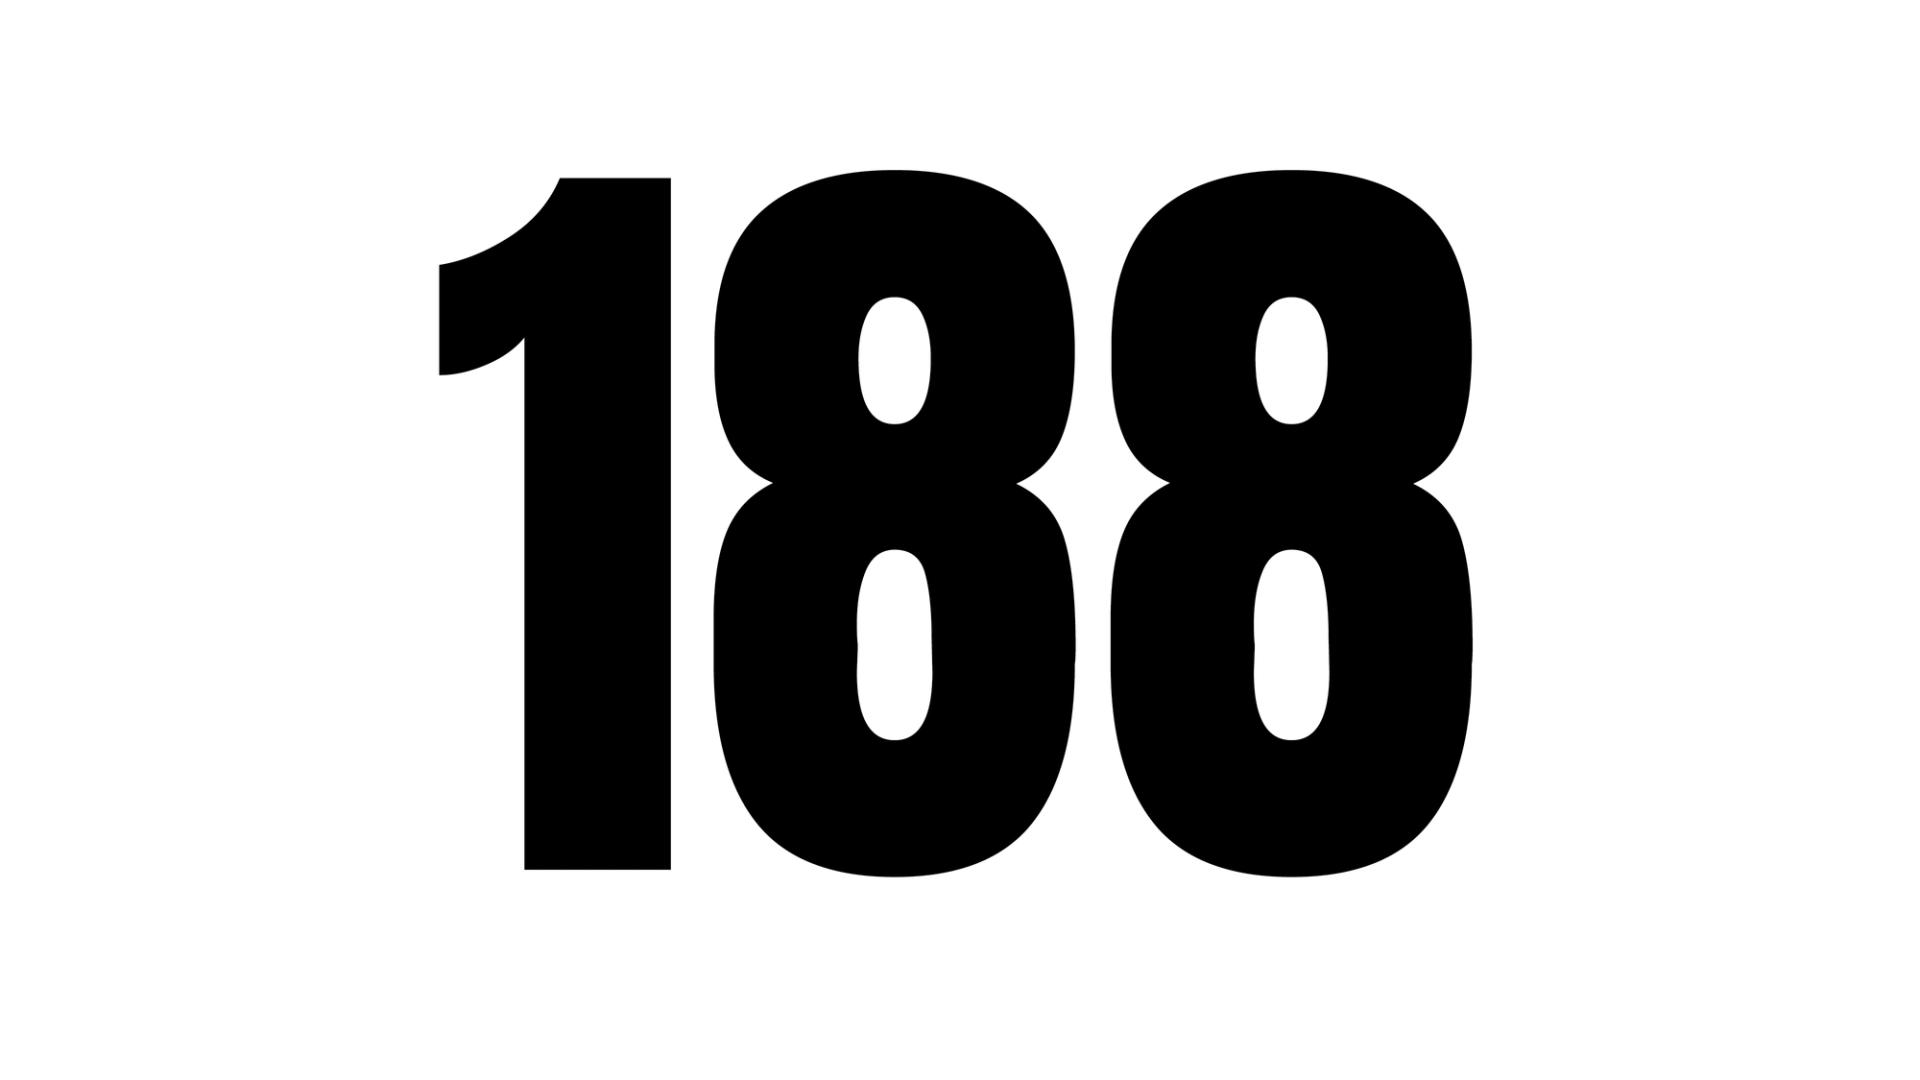 A graphic with text which says 188